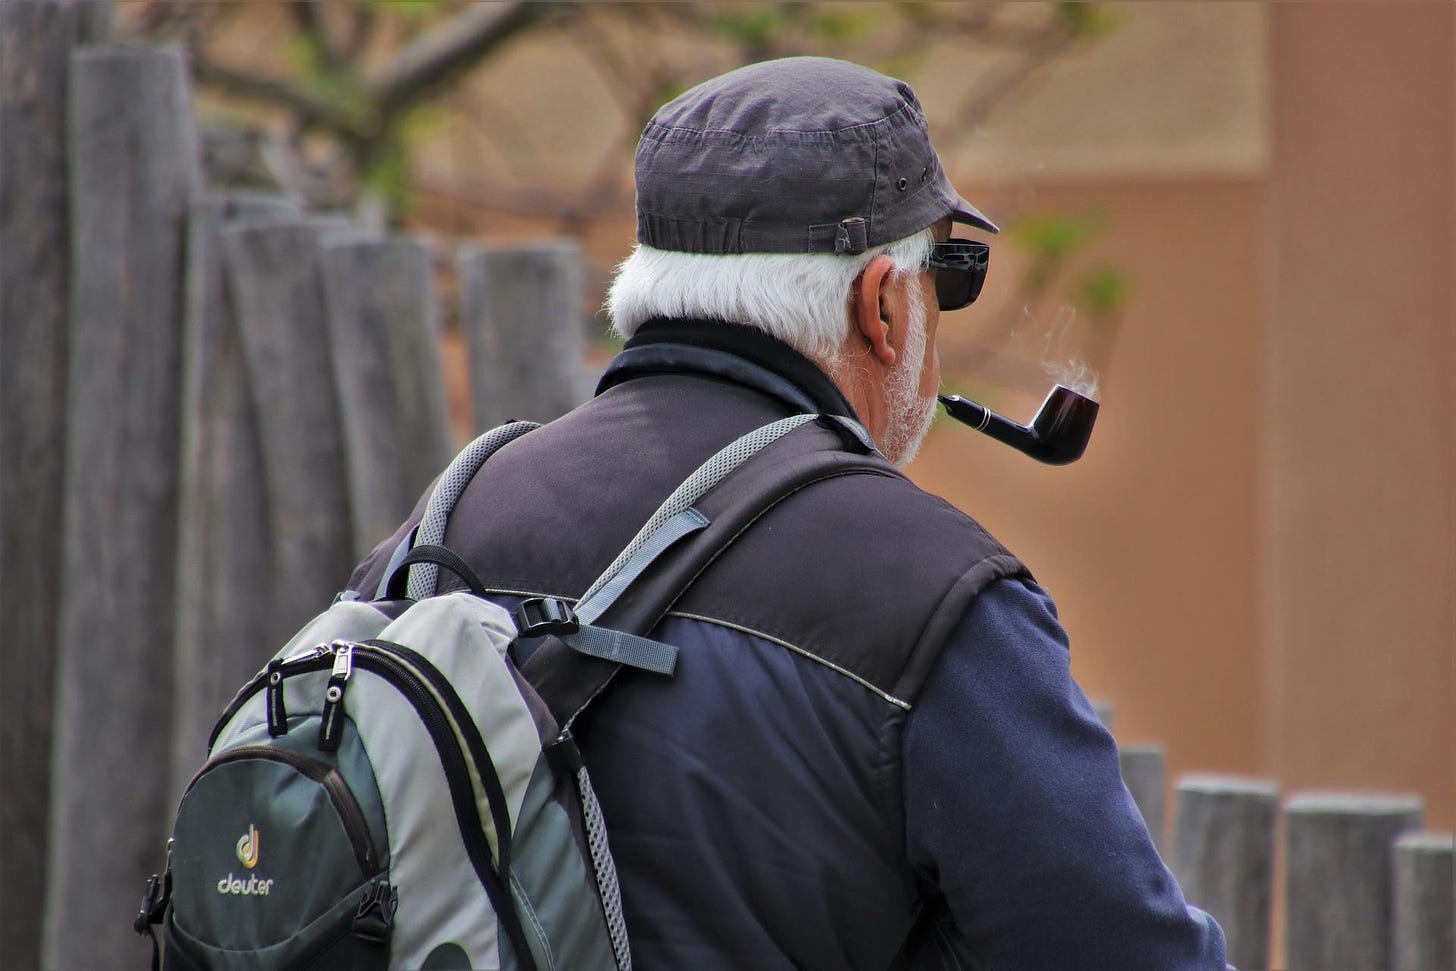 Camera looks over shoulder of older man with gray hair and beard and sunglasses. He is smoking a pipe.